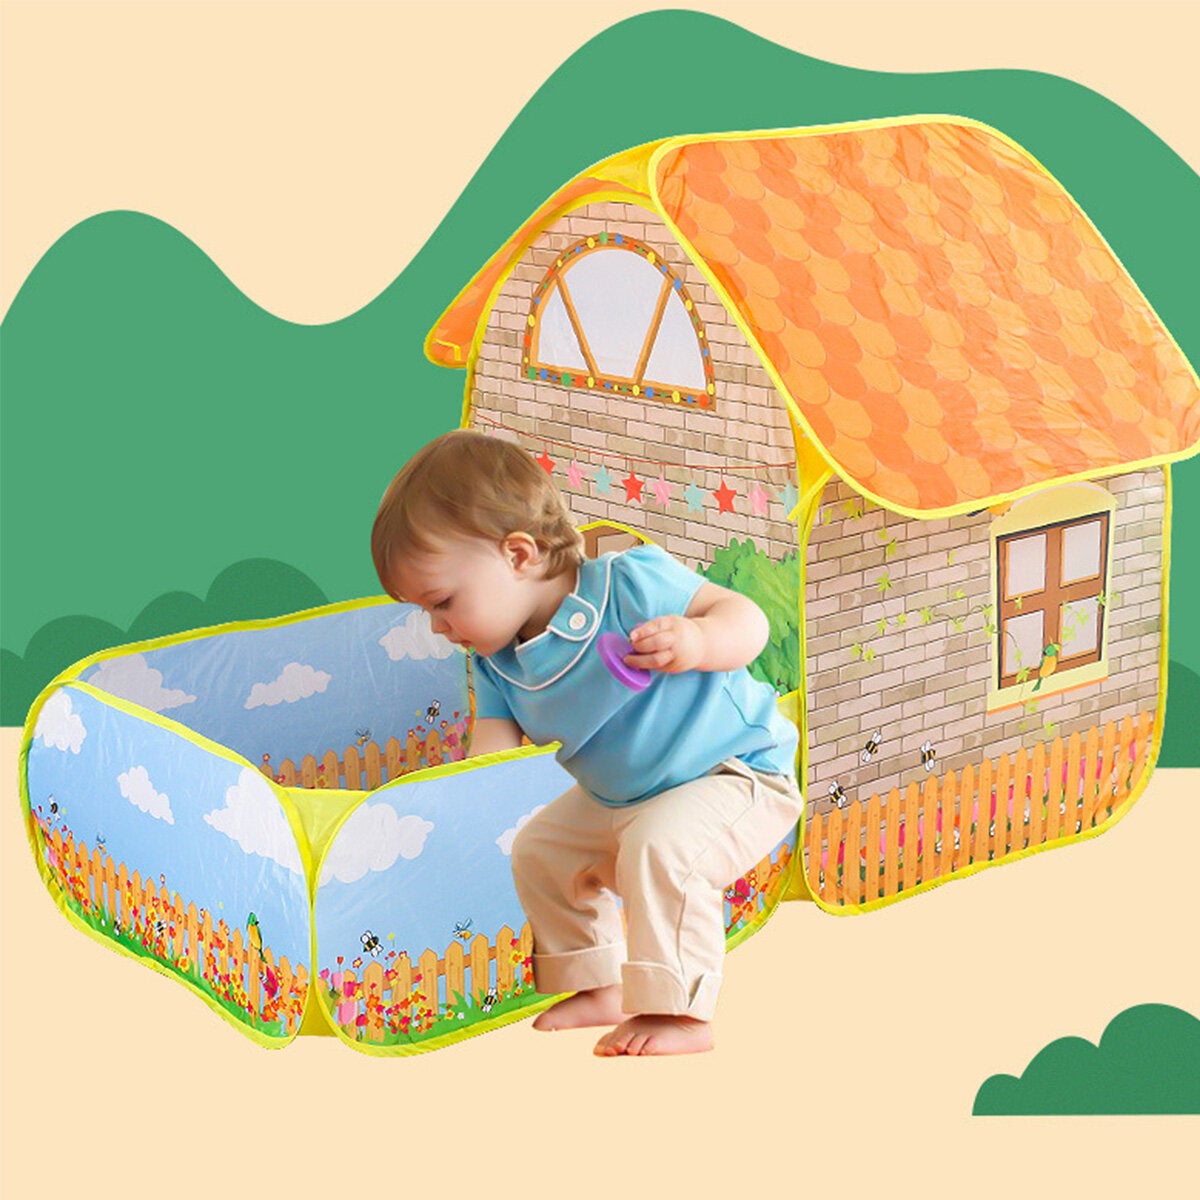 Portable Kids Children Play Tent House Up Tents Beach Pool Tent for Courtyard Garden Playing Crawling Folding Tent Toy